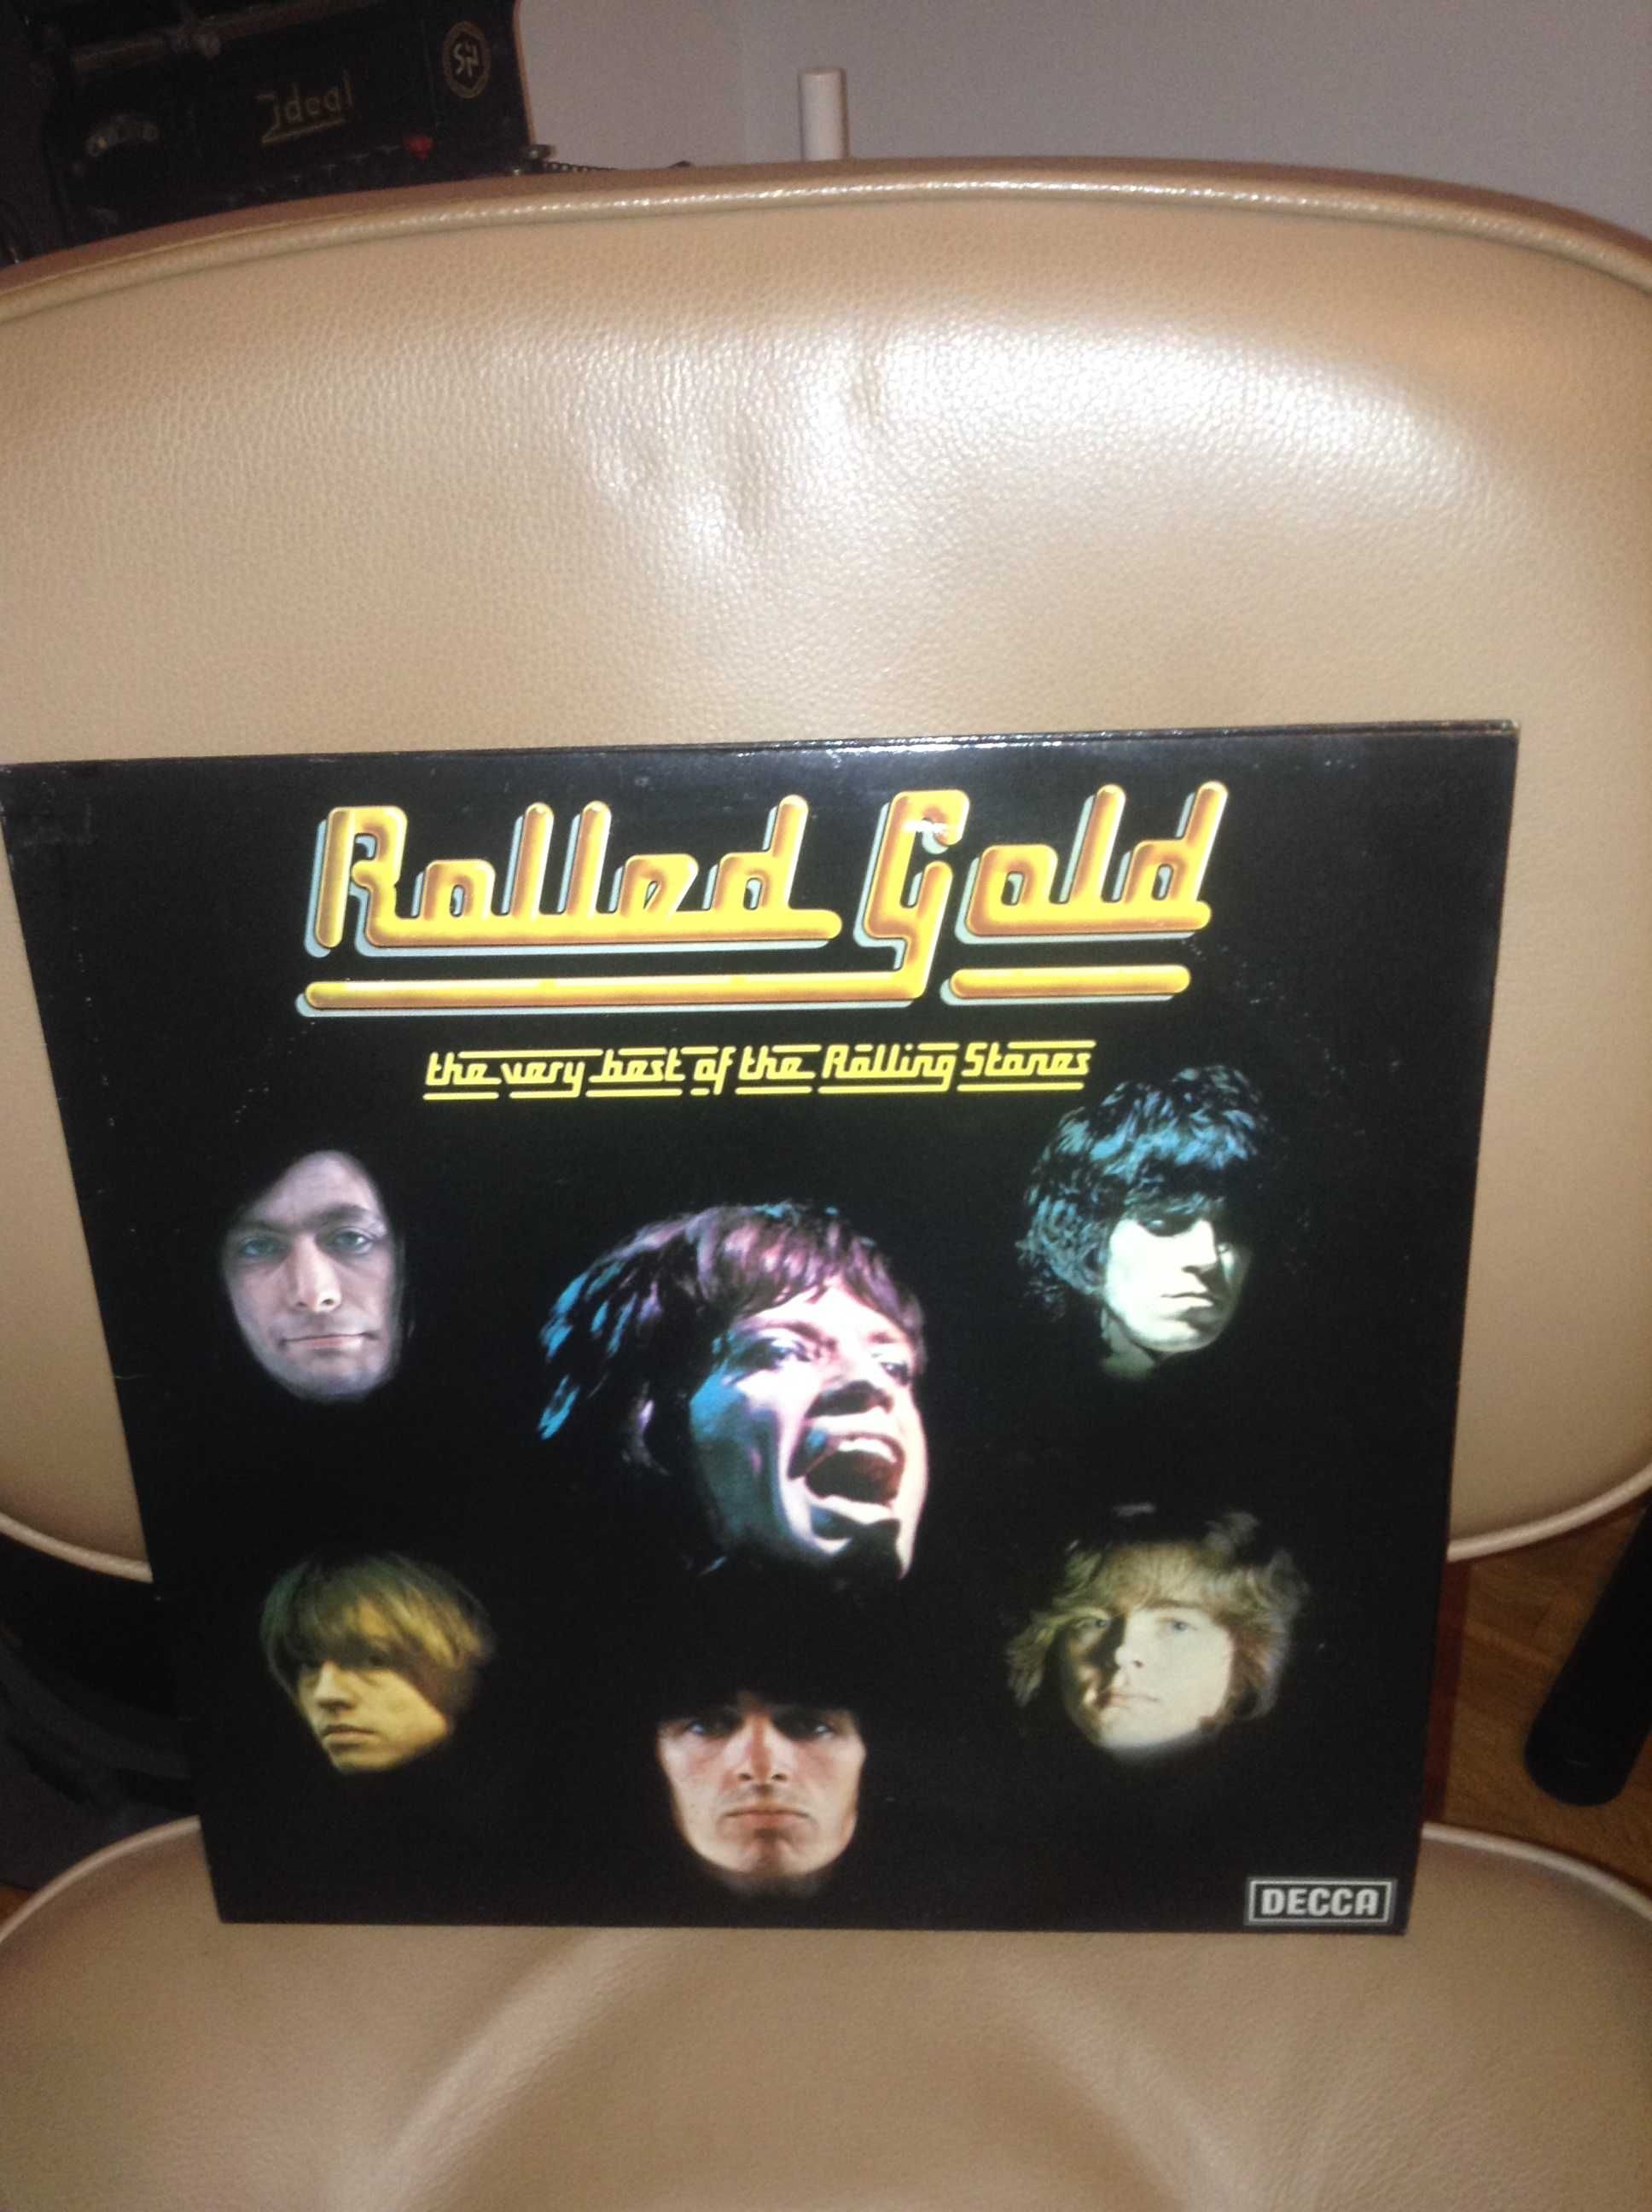 Rolling Stones - Rolled Gold (Vinil Duplo)